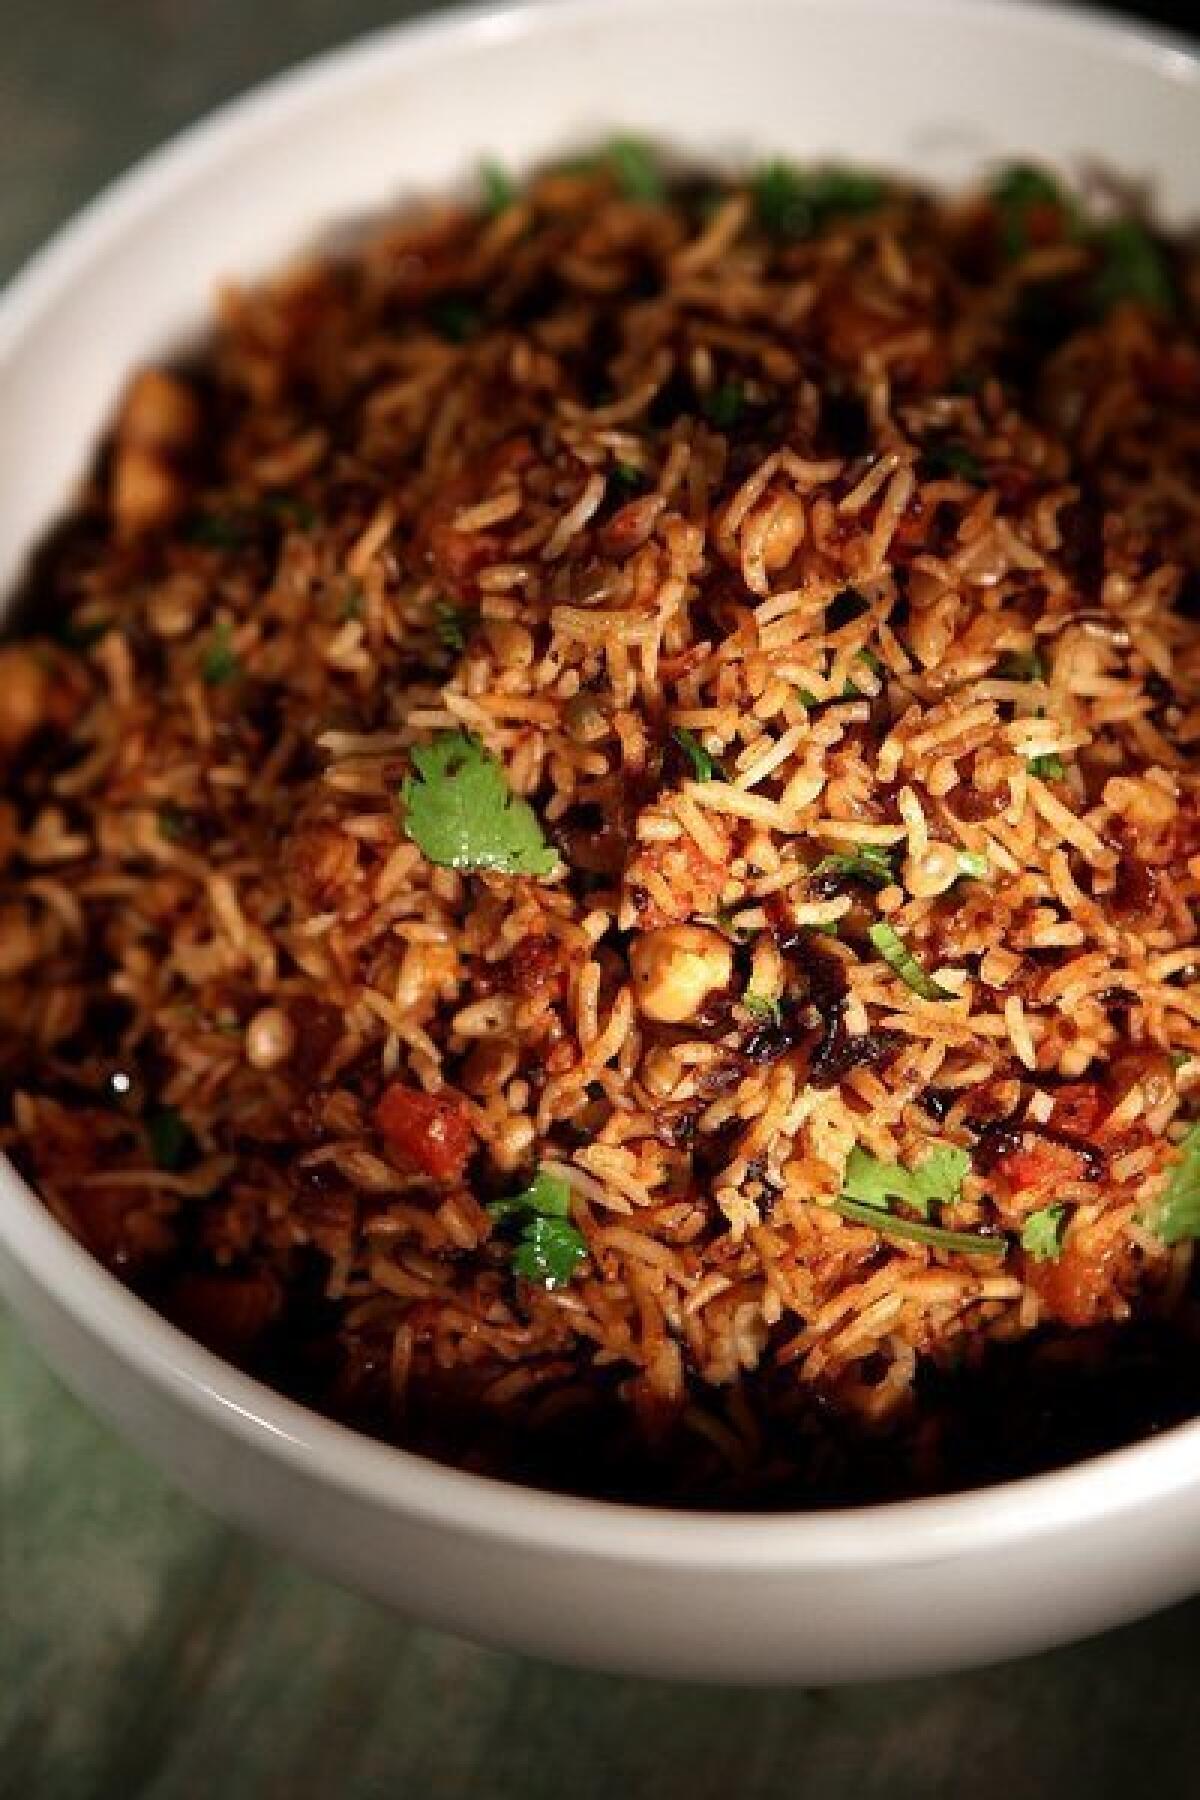 Rice pilaf with chickpeas, lentils and browned onions.